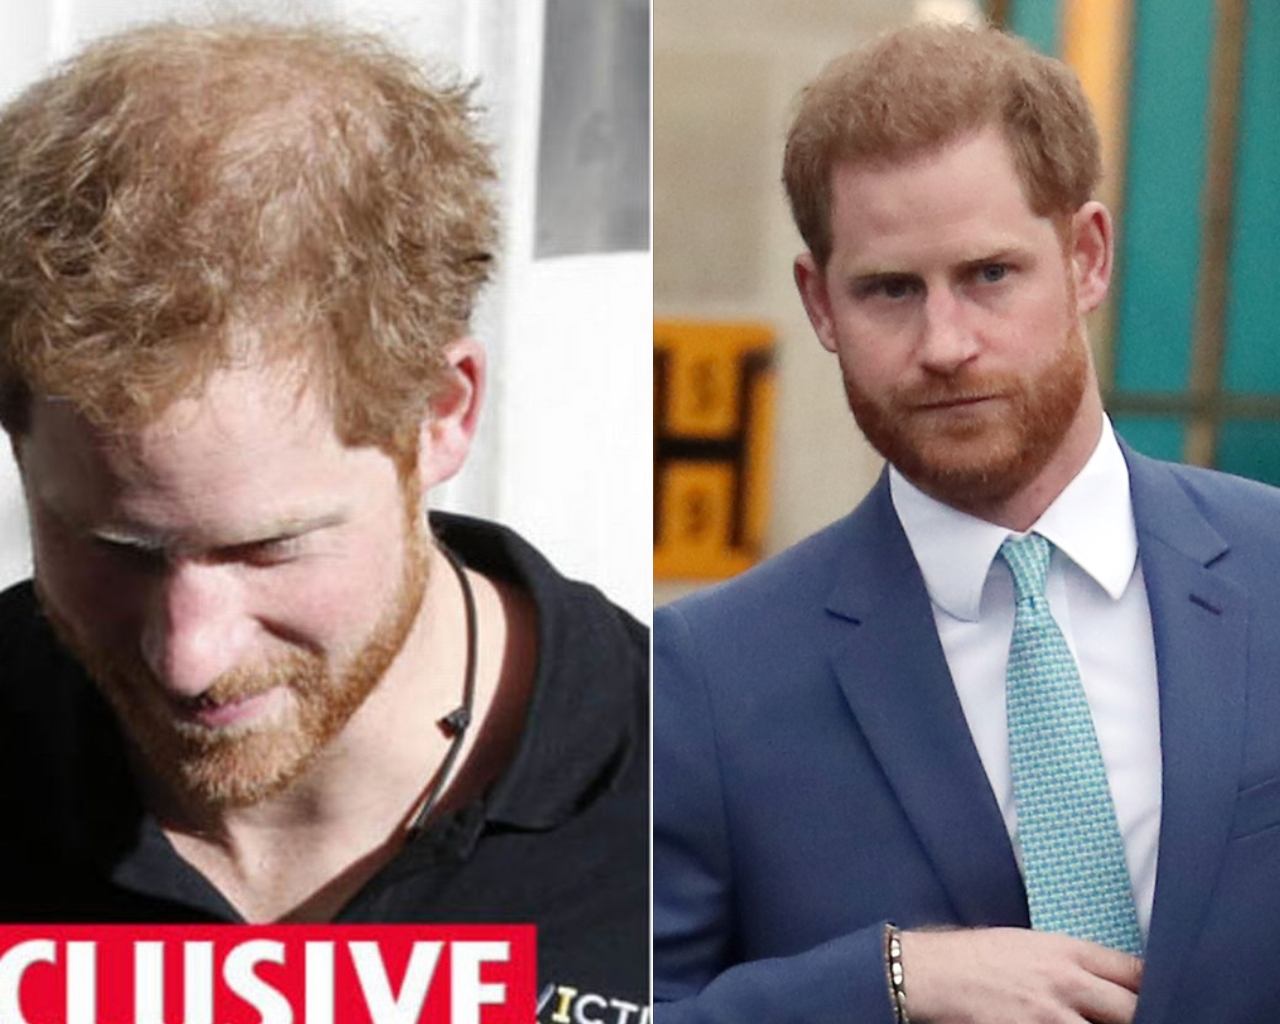 Prince Harry before and after possible hair restoration